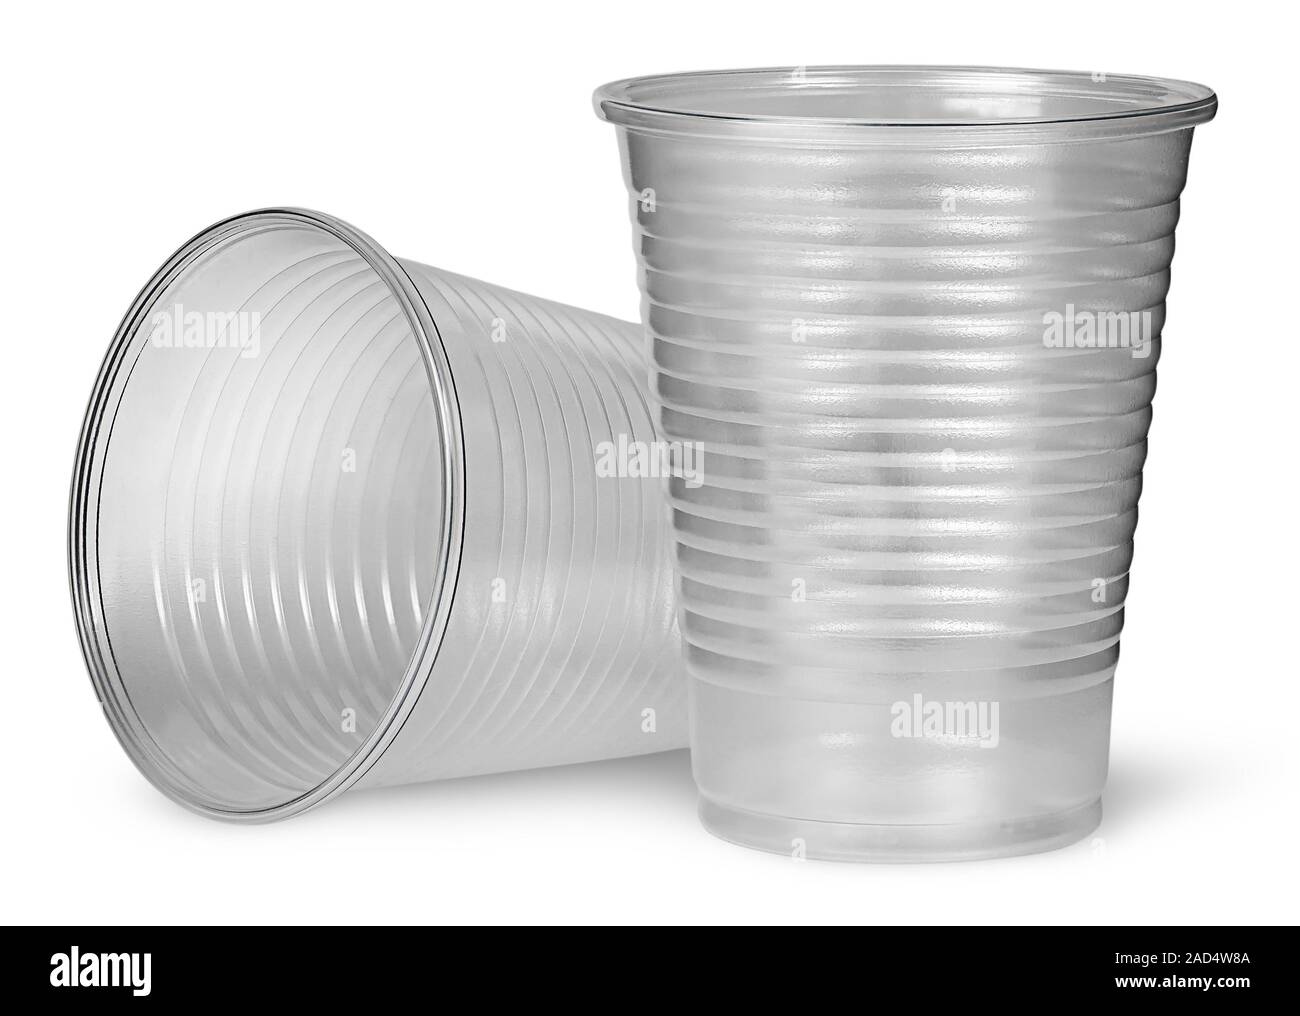 https://c8.alamy.com/comp/2AD4W8A/lying-and-standing-plastic-cups-2AD4W8A.jpg